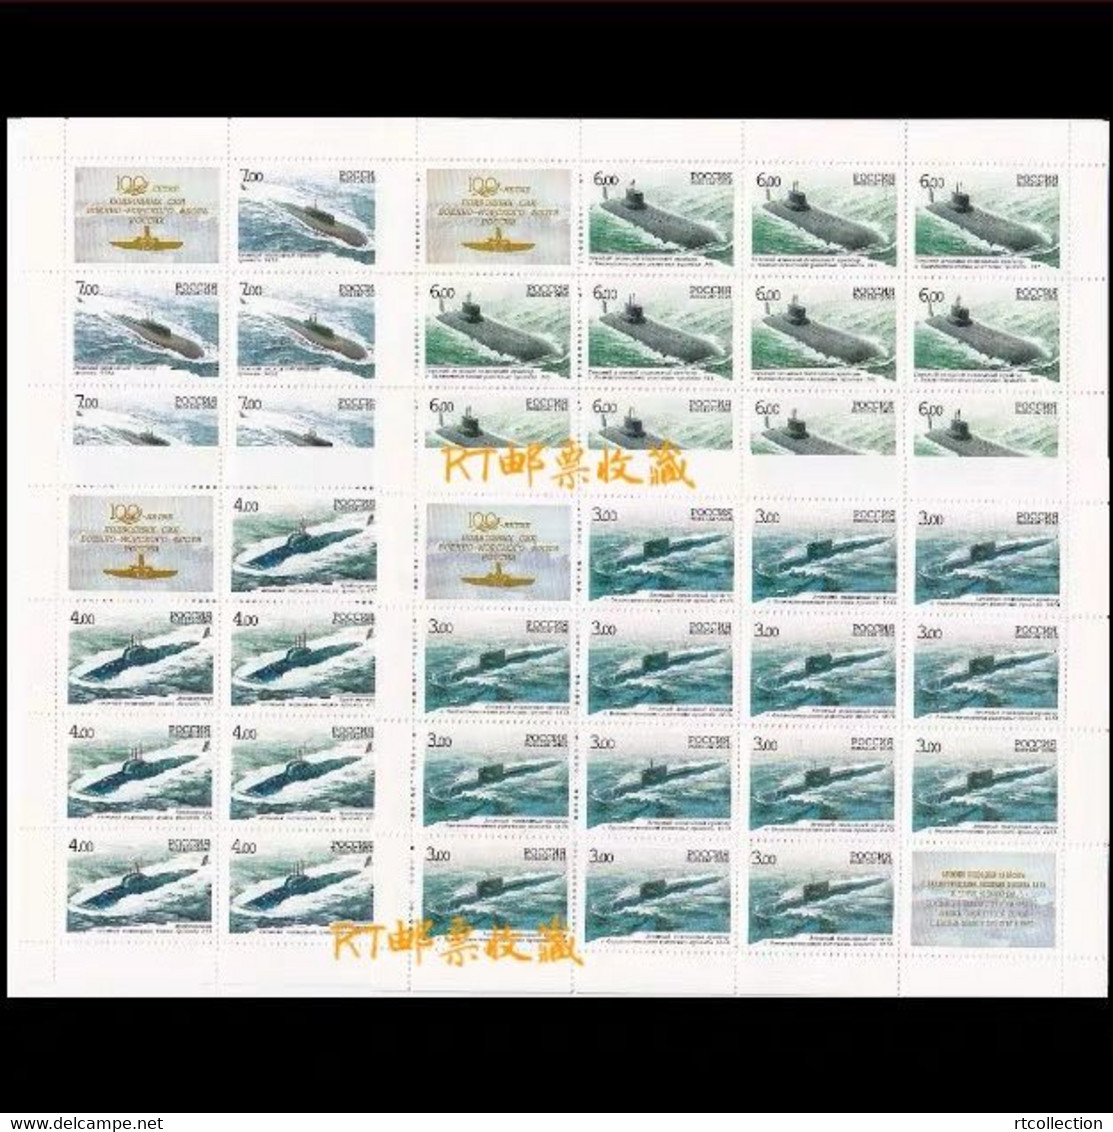 Russia 2006 Sheet 100th Anniversary Russian Submarine Forces Submarines Ships Transport Military Celebrations Stamps MNH - Fogli Completi